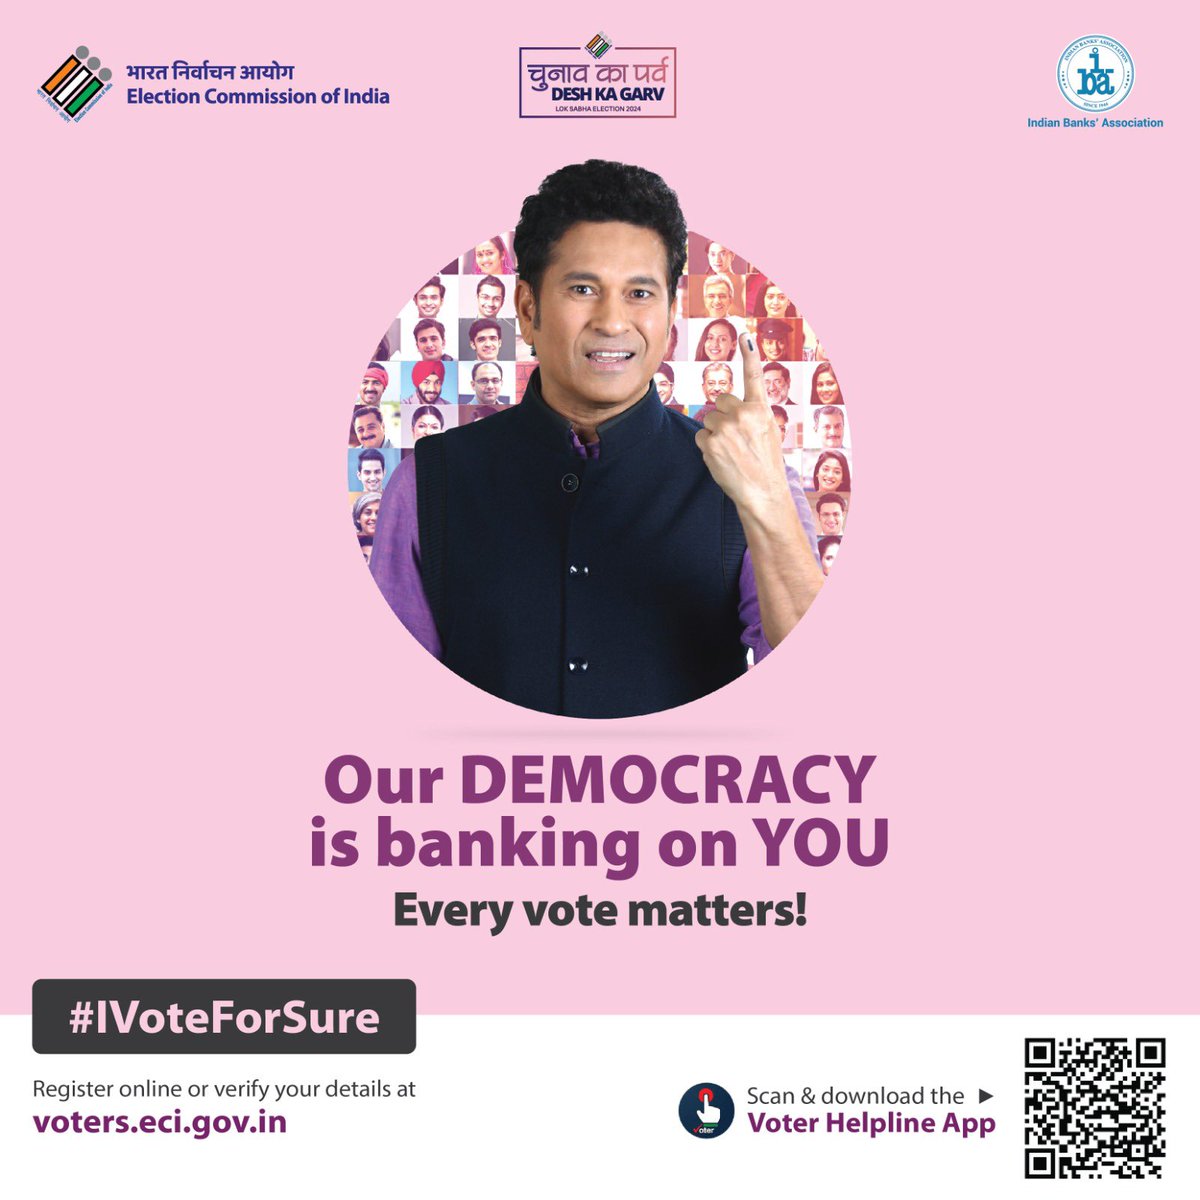 Cast your vote and make it count. #IVoteForSure